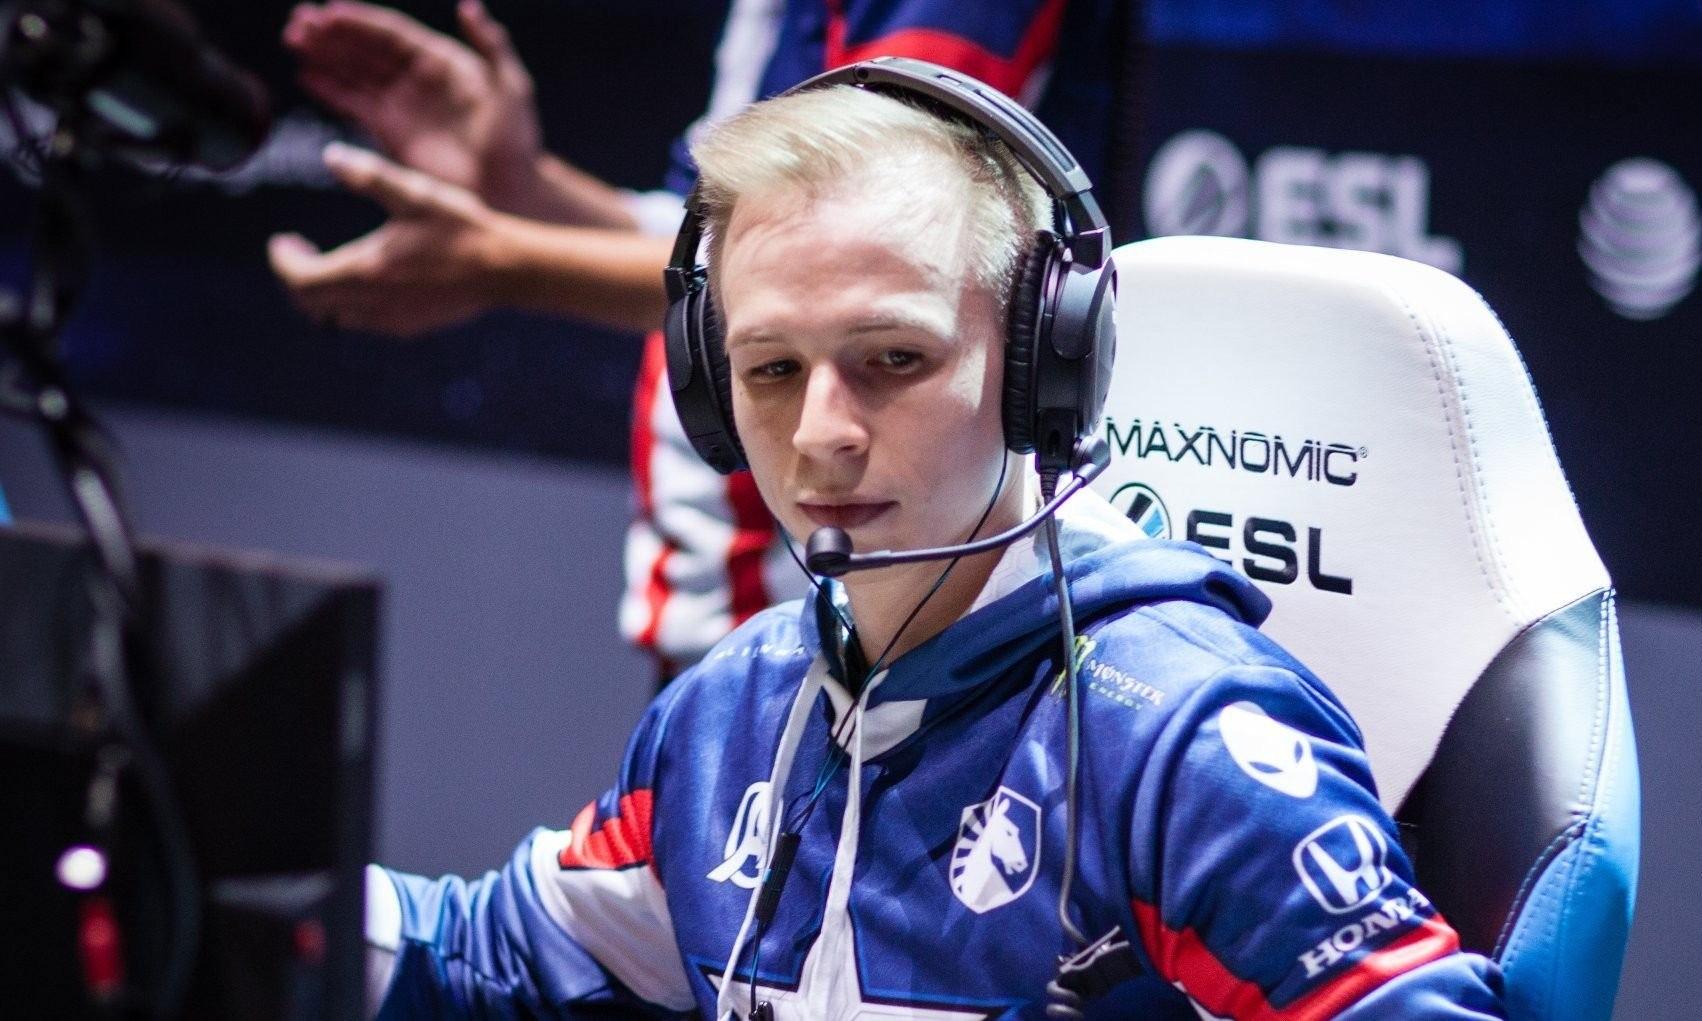 Liquid didn't manage to finish the first day with a perfect record